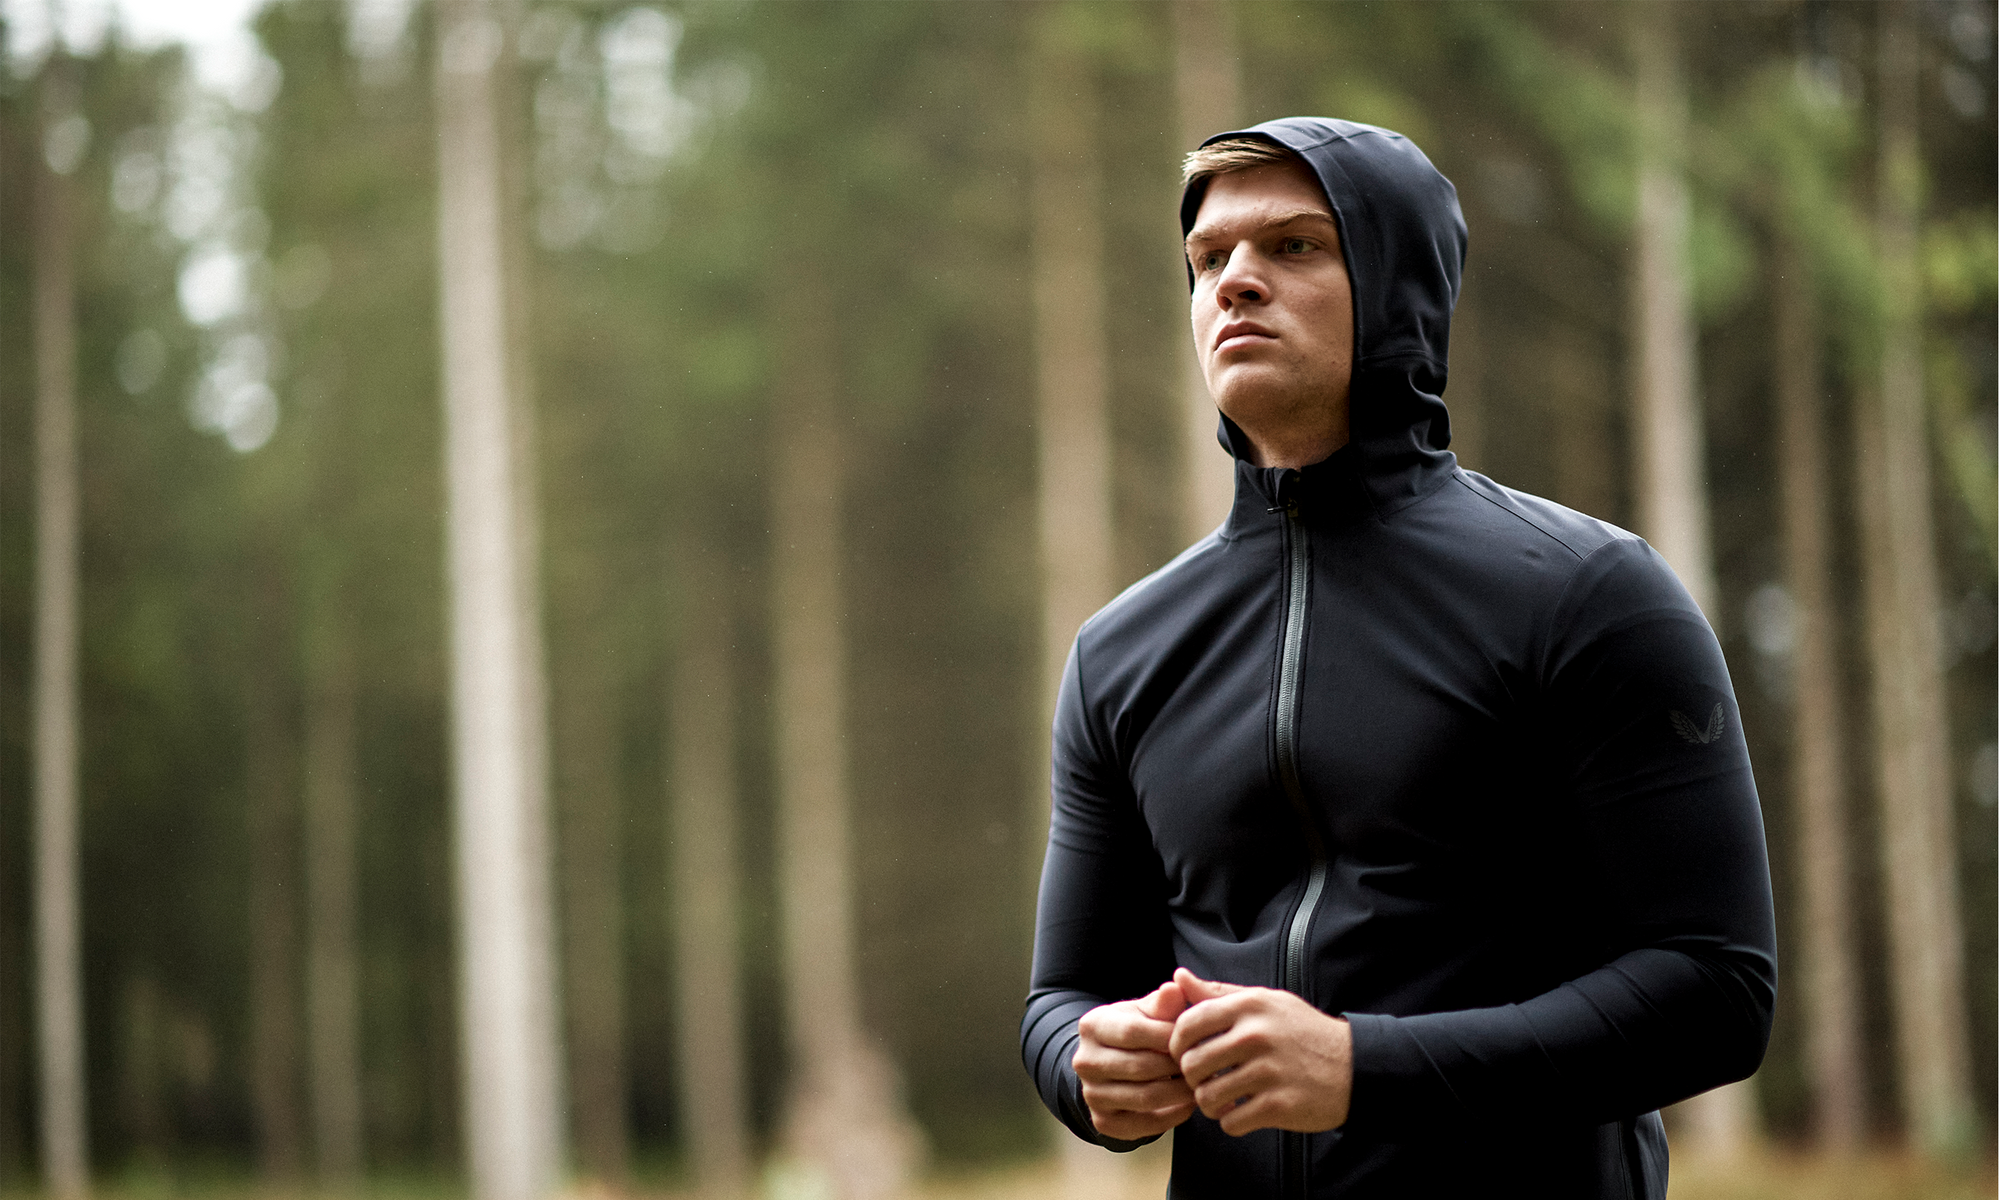 Winter fitness clothing: Everything you need to workout in the cold